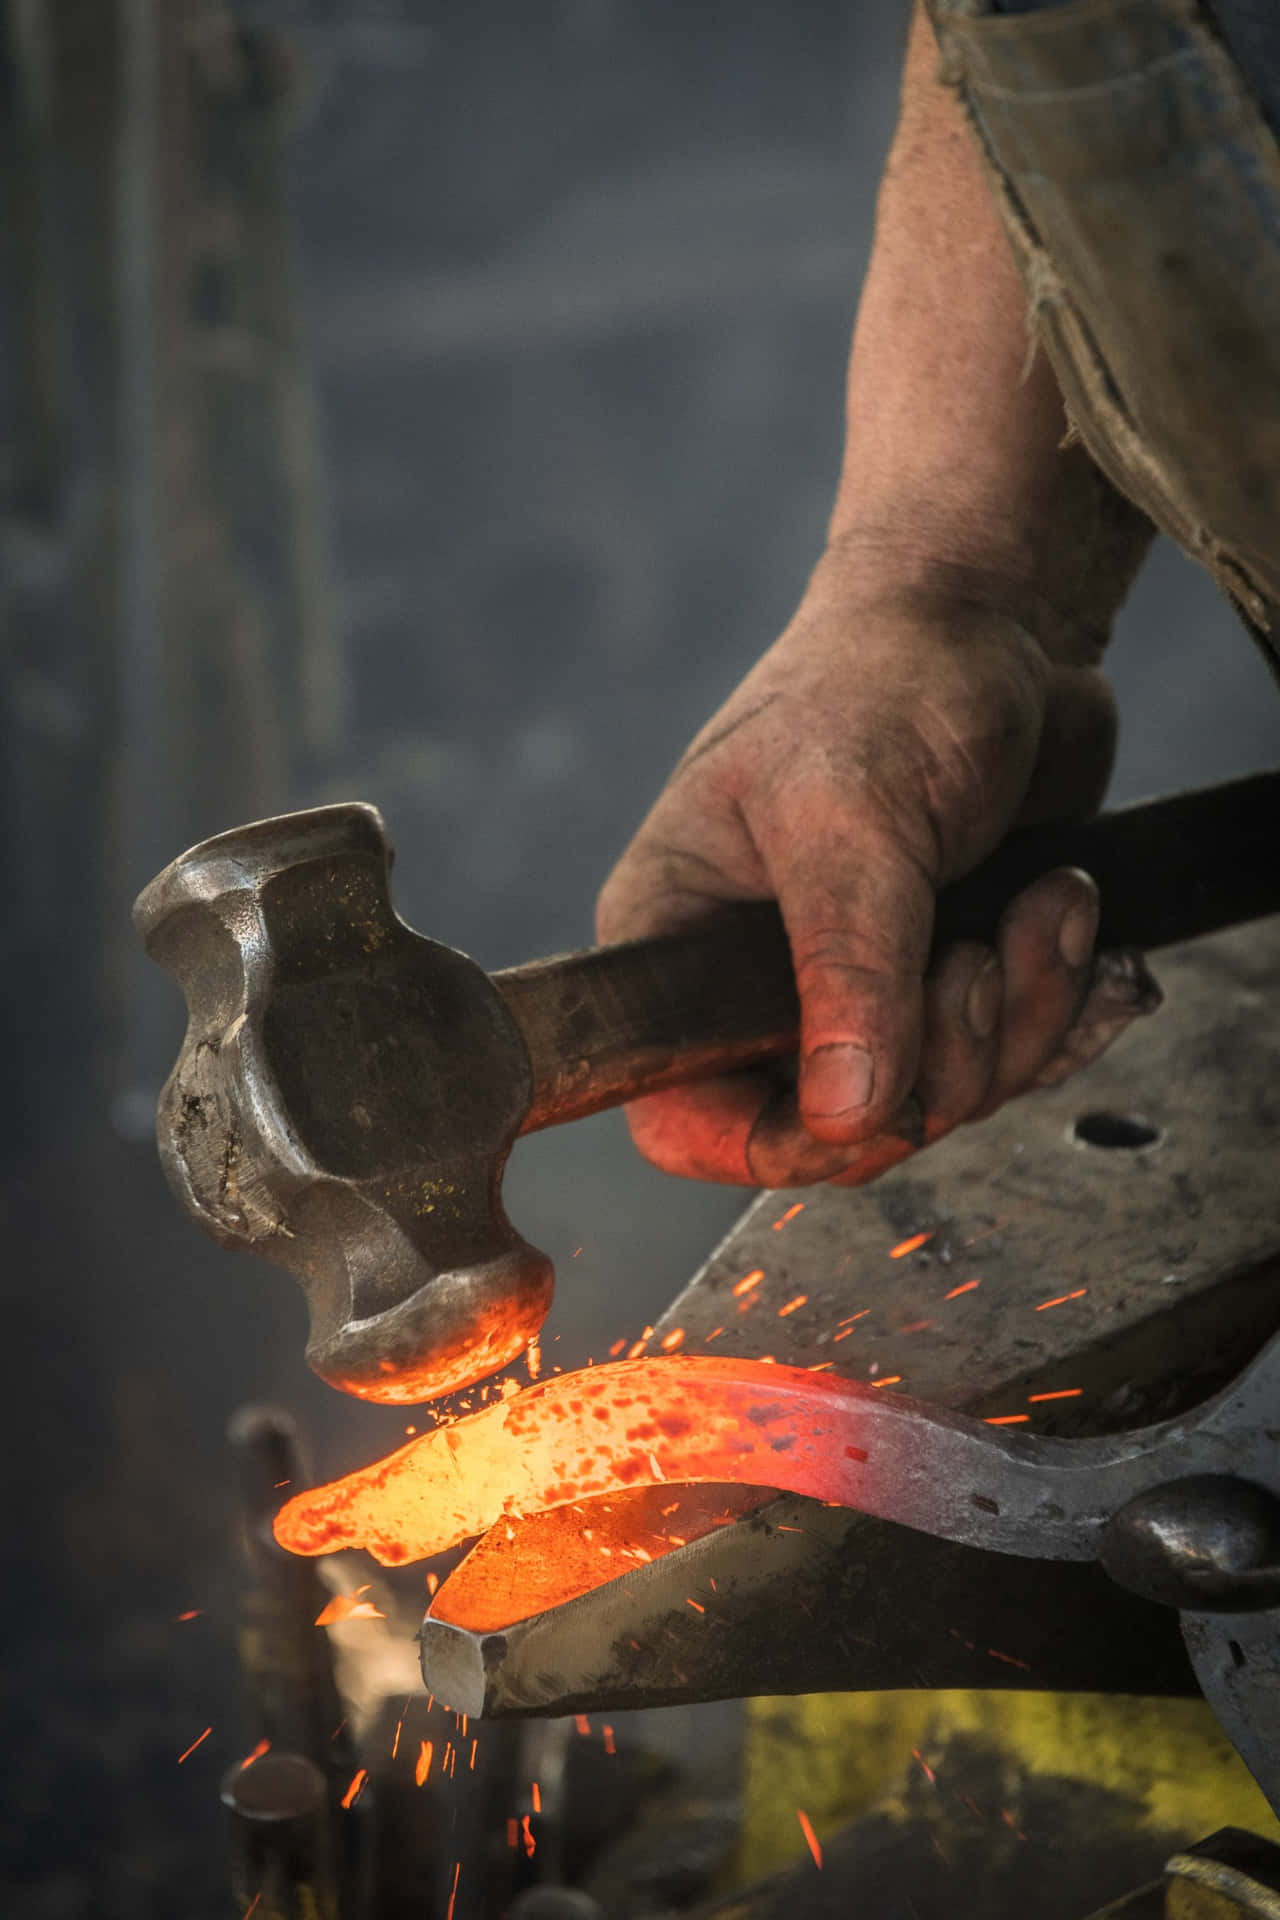 A glimpse inside the world of a professional blacksmith Wallpaper